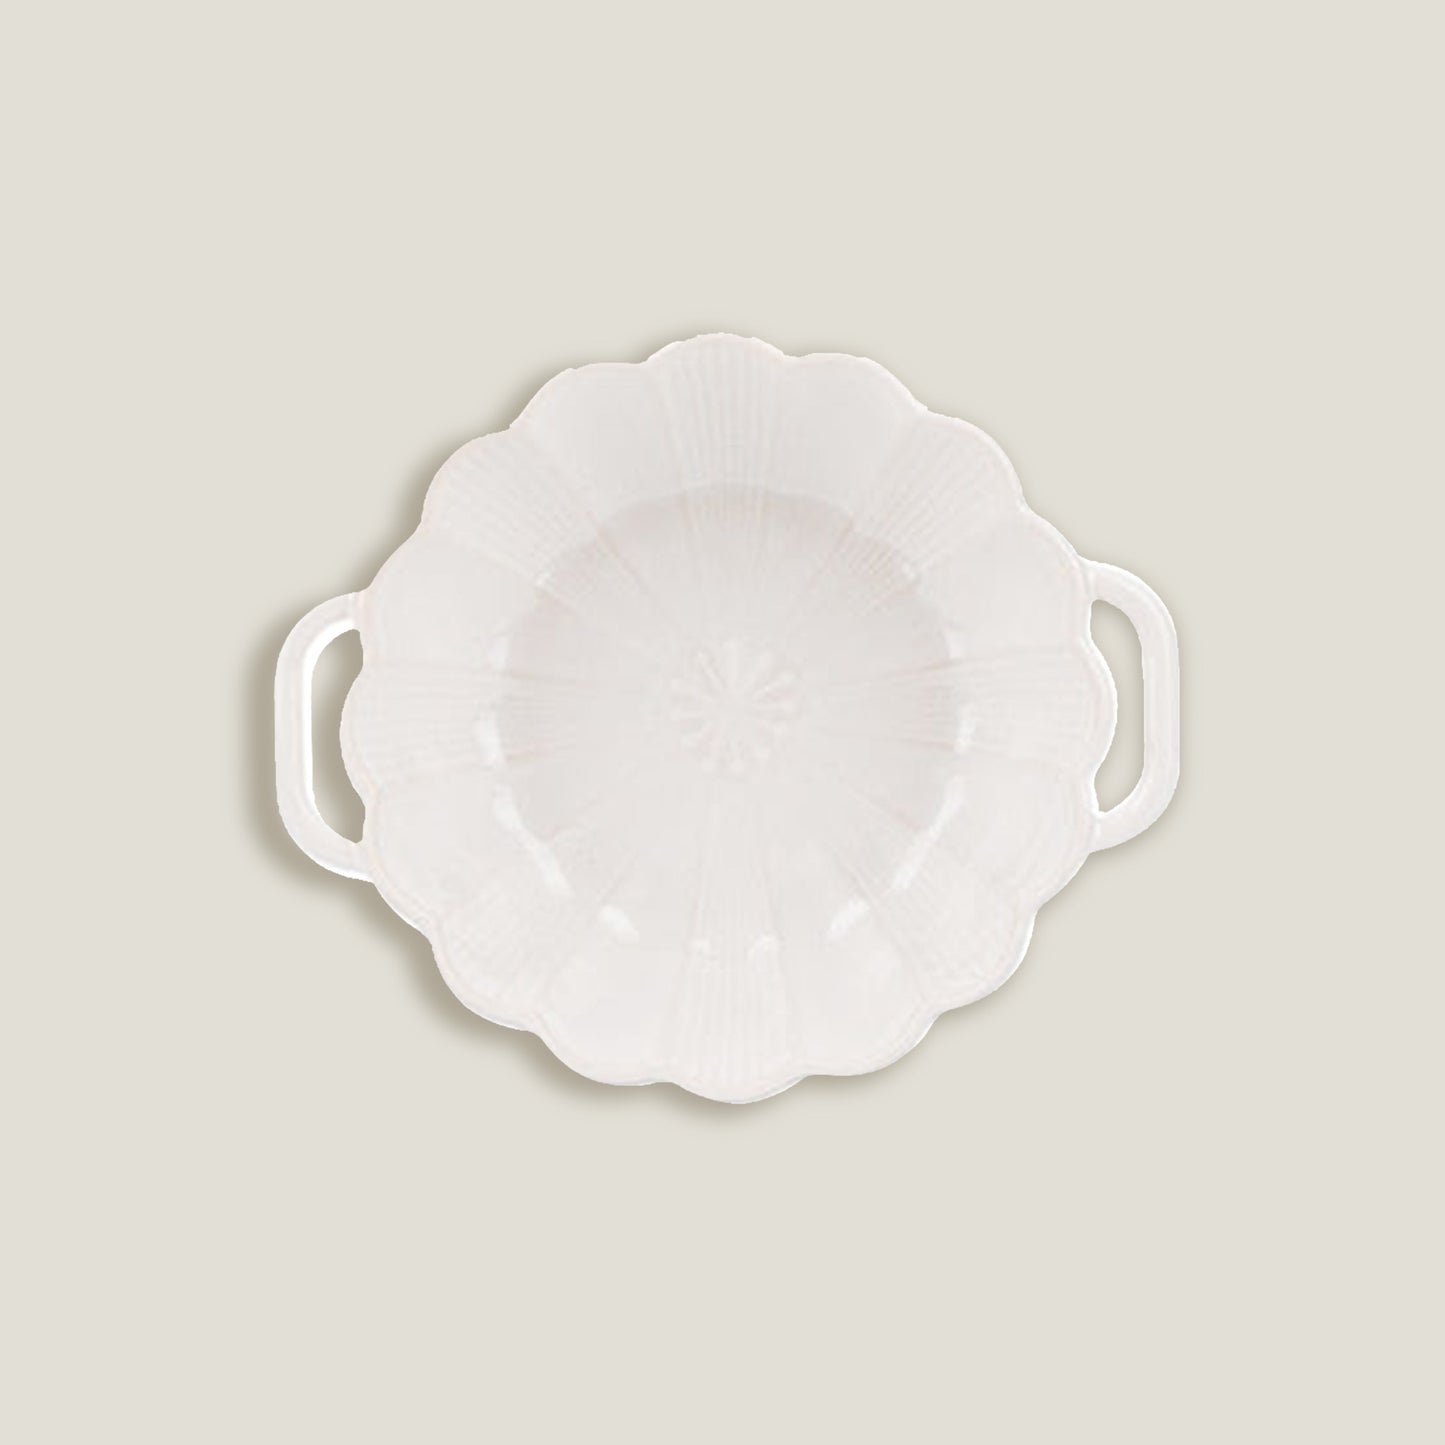 White Ceramic Bowls With Handle